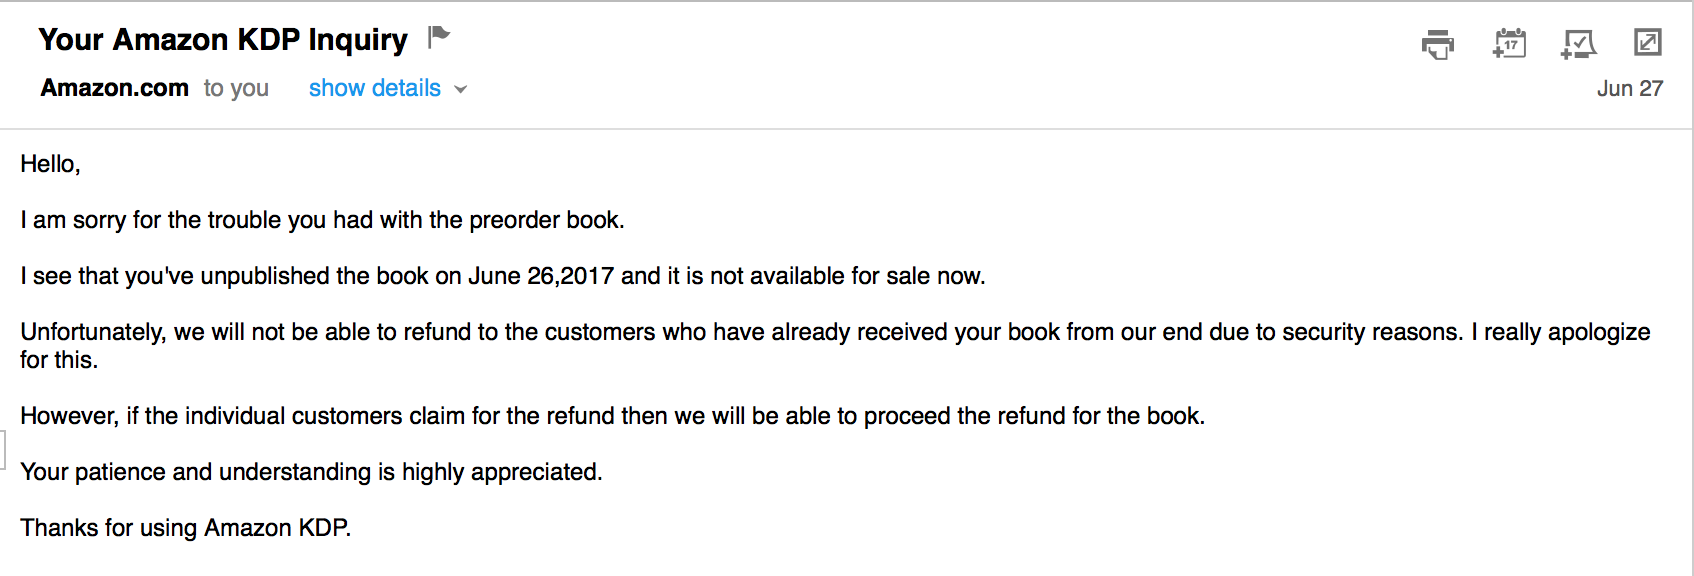 Letter from KDP "I am sorry for the trouble you had with the preorder book. I see that you've unpublished the book on June 26,2017 and it is not available for sale now. Unfortunately, we will not be able to refund to the customers who have already received your book from our end due to security reasons. I really apologize for this. However, if the individual customers claim for the refund then we will be able to proceed the refund for the book. Your patience and understanding is highly appreciated. Thanks for using Amazon KDP."